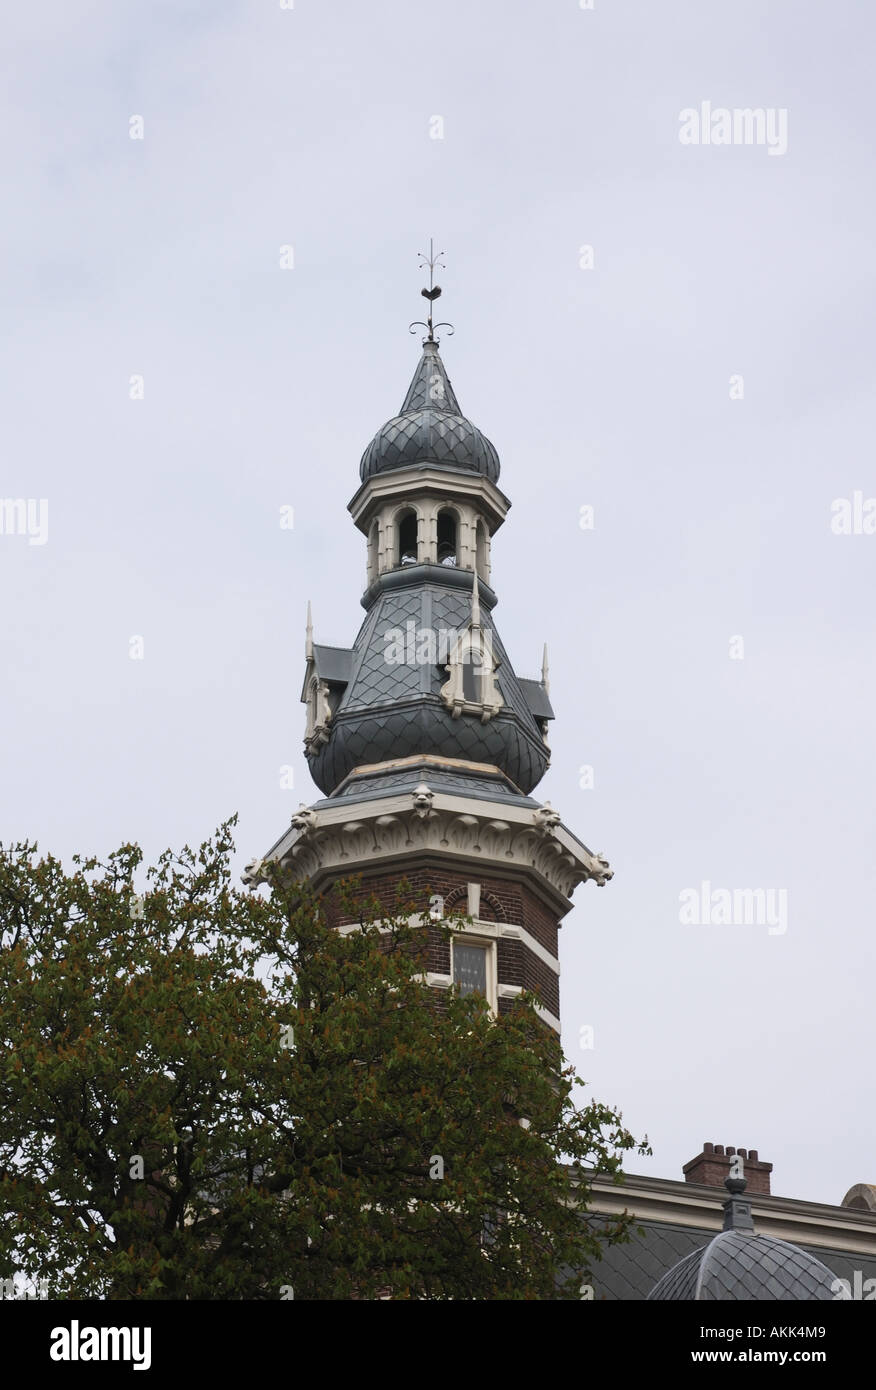 Octagonal brick tower topped by an ornate cupola with an onion shaped dome Amsterdam Holland 24 April 2006 Stock Photo